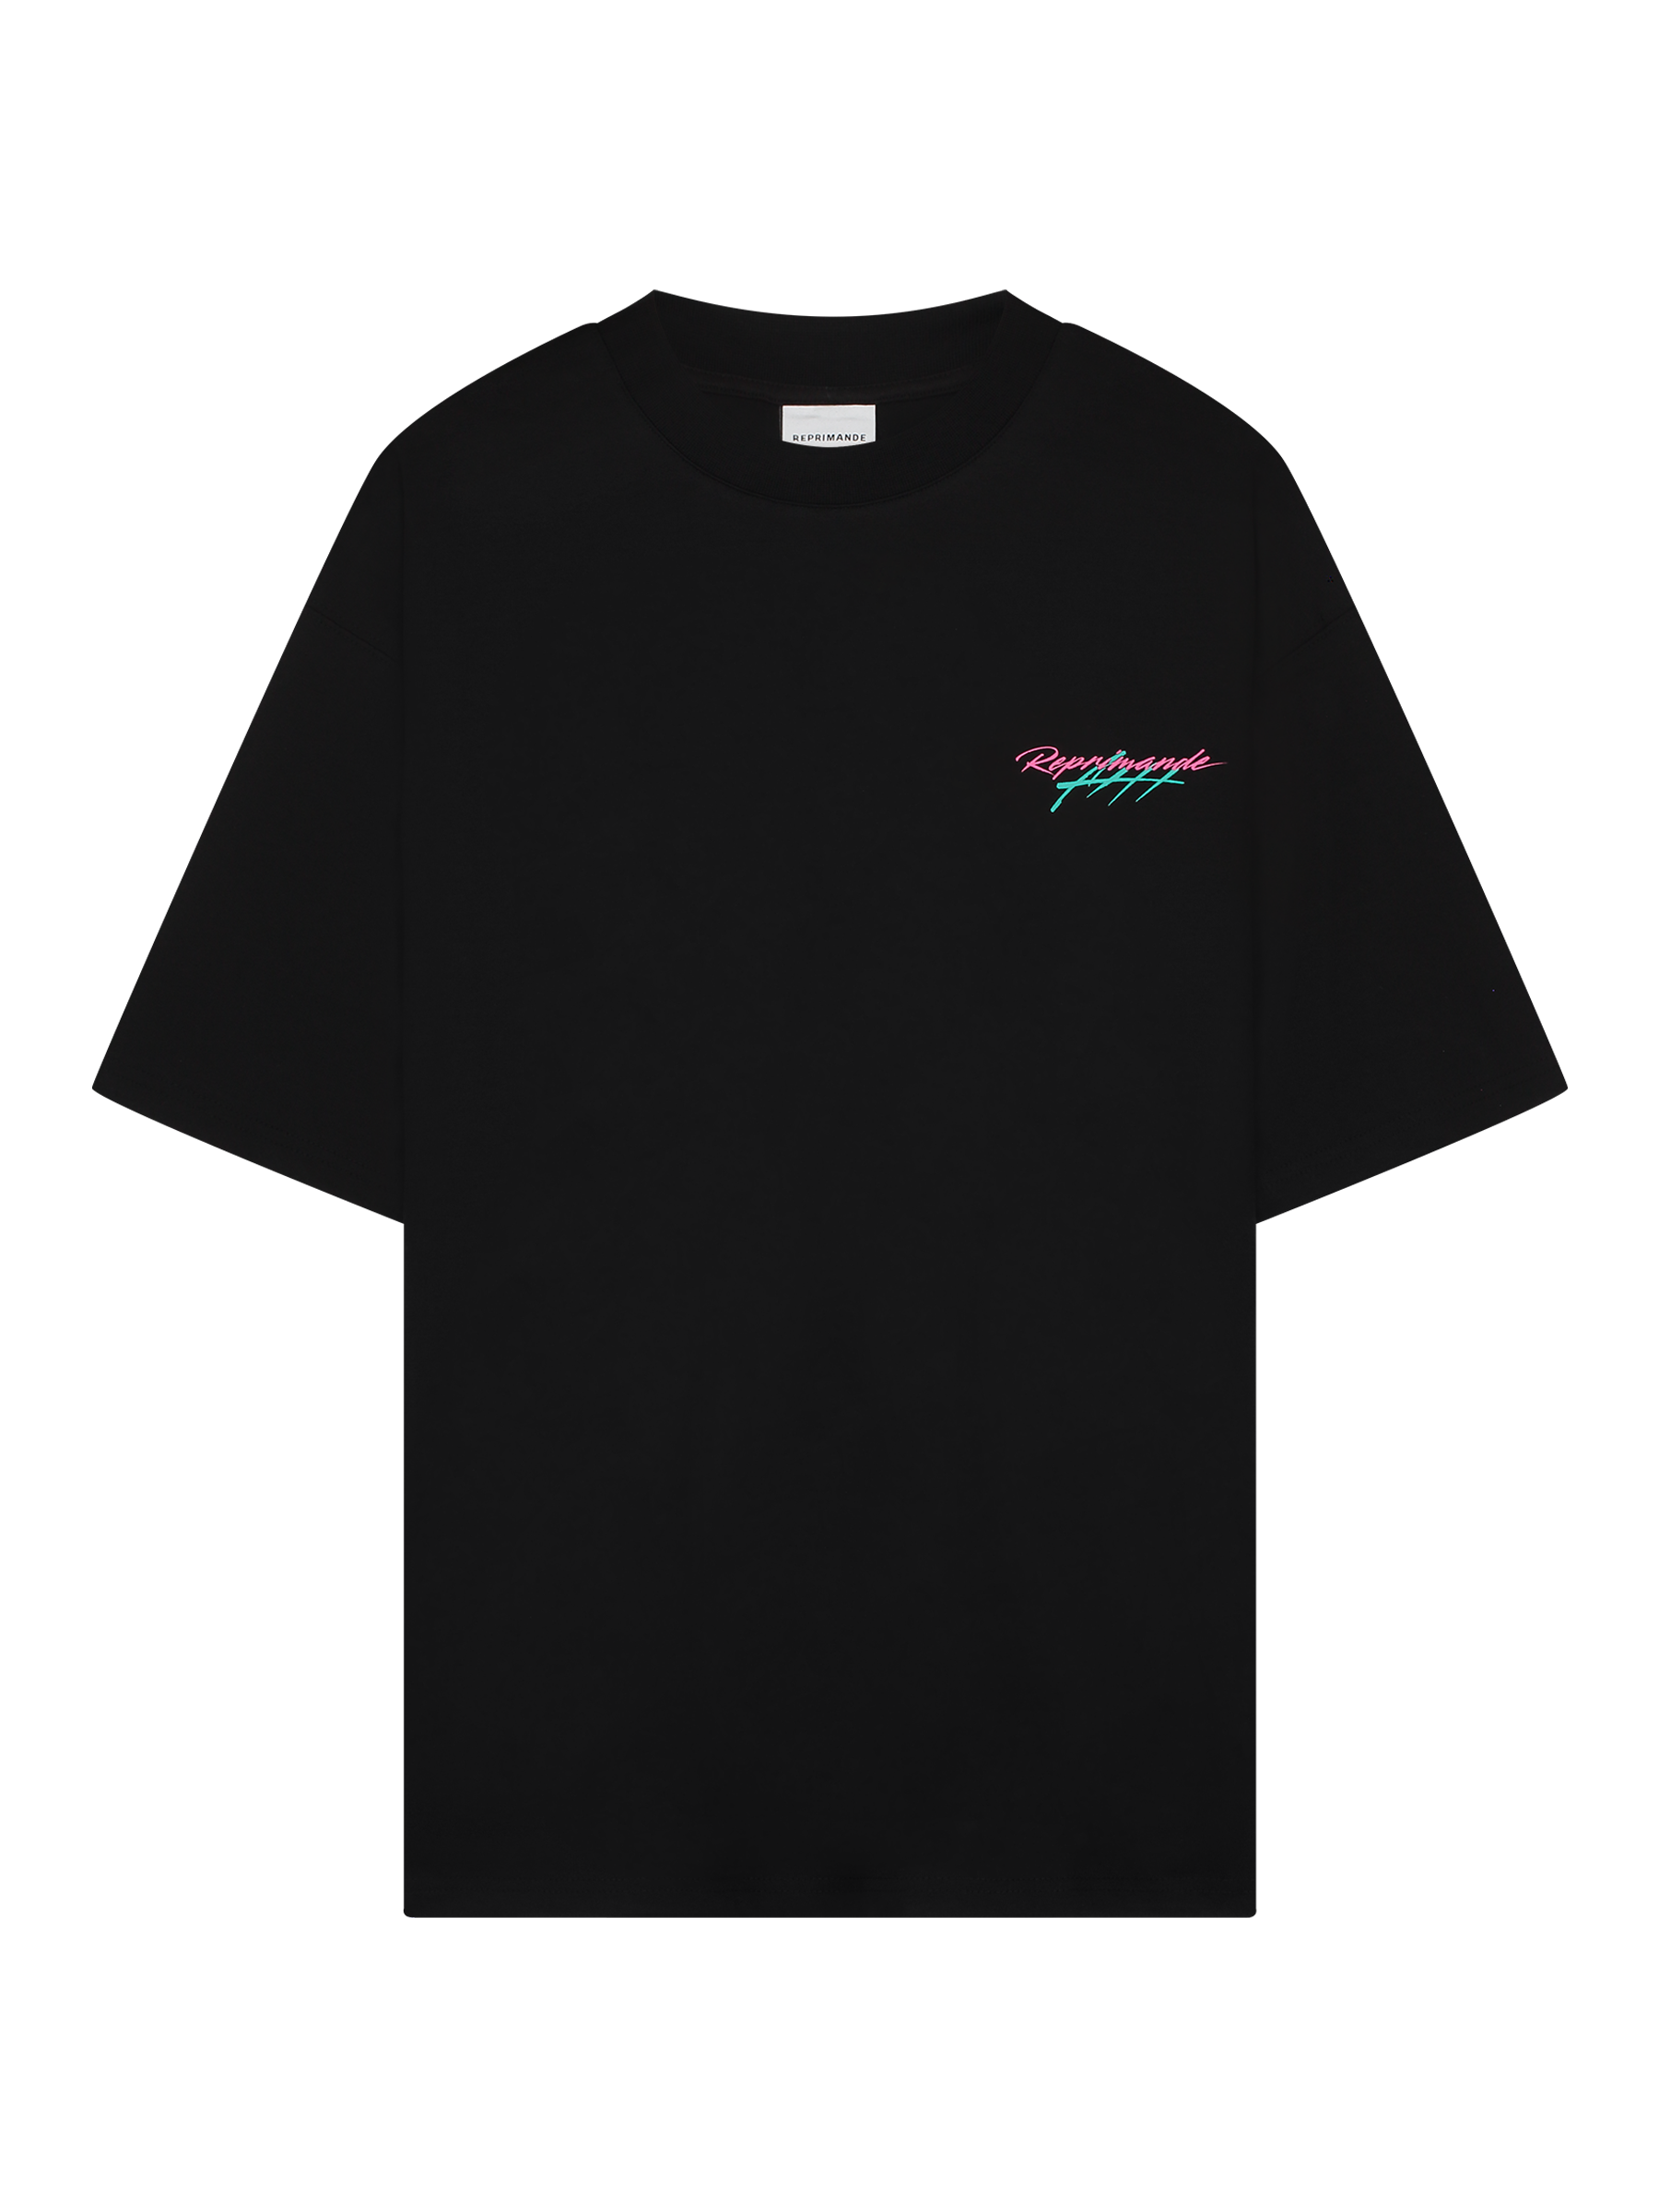 REPRIMANDE - RELAXED FIT MIAMI TSHIRT BLACK